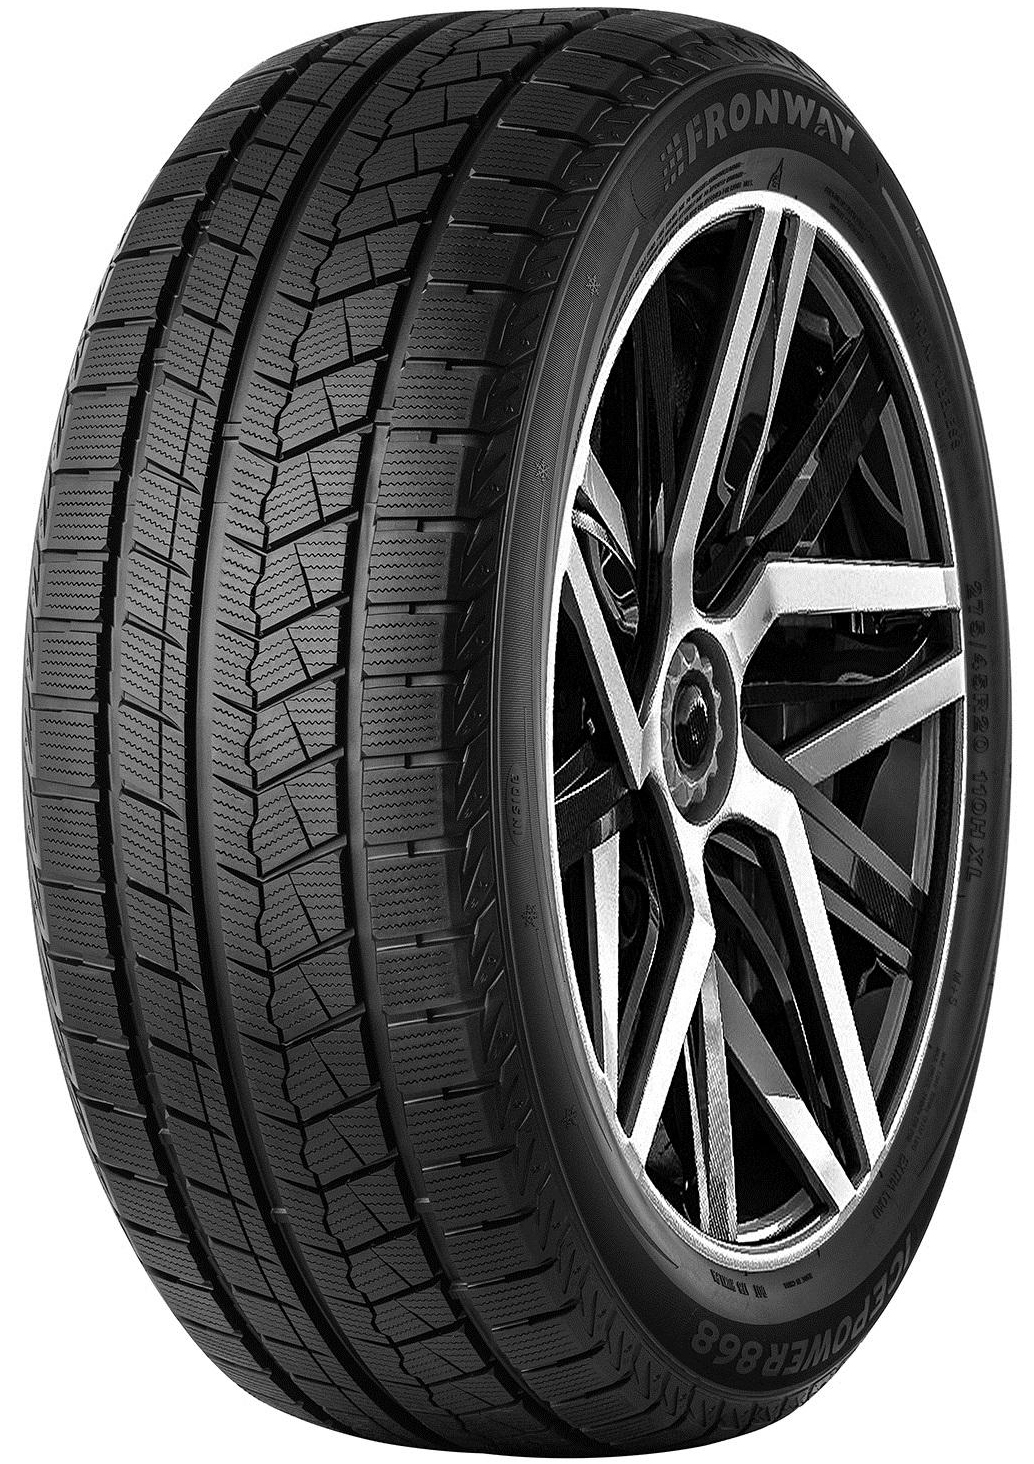    Fronway Icepower 868 225/55 R17 